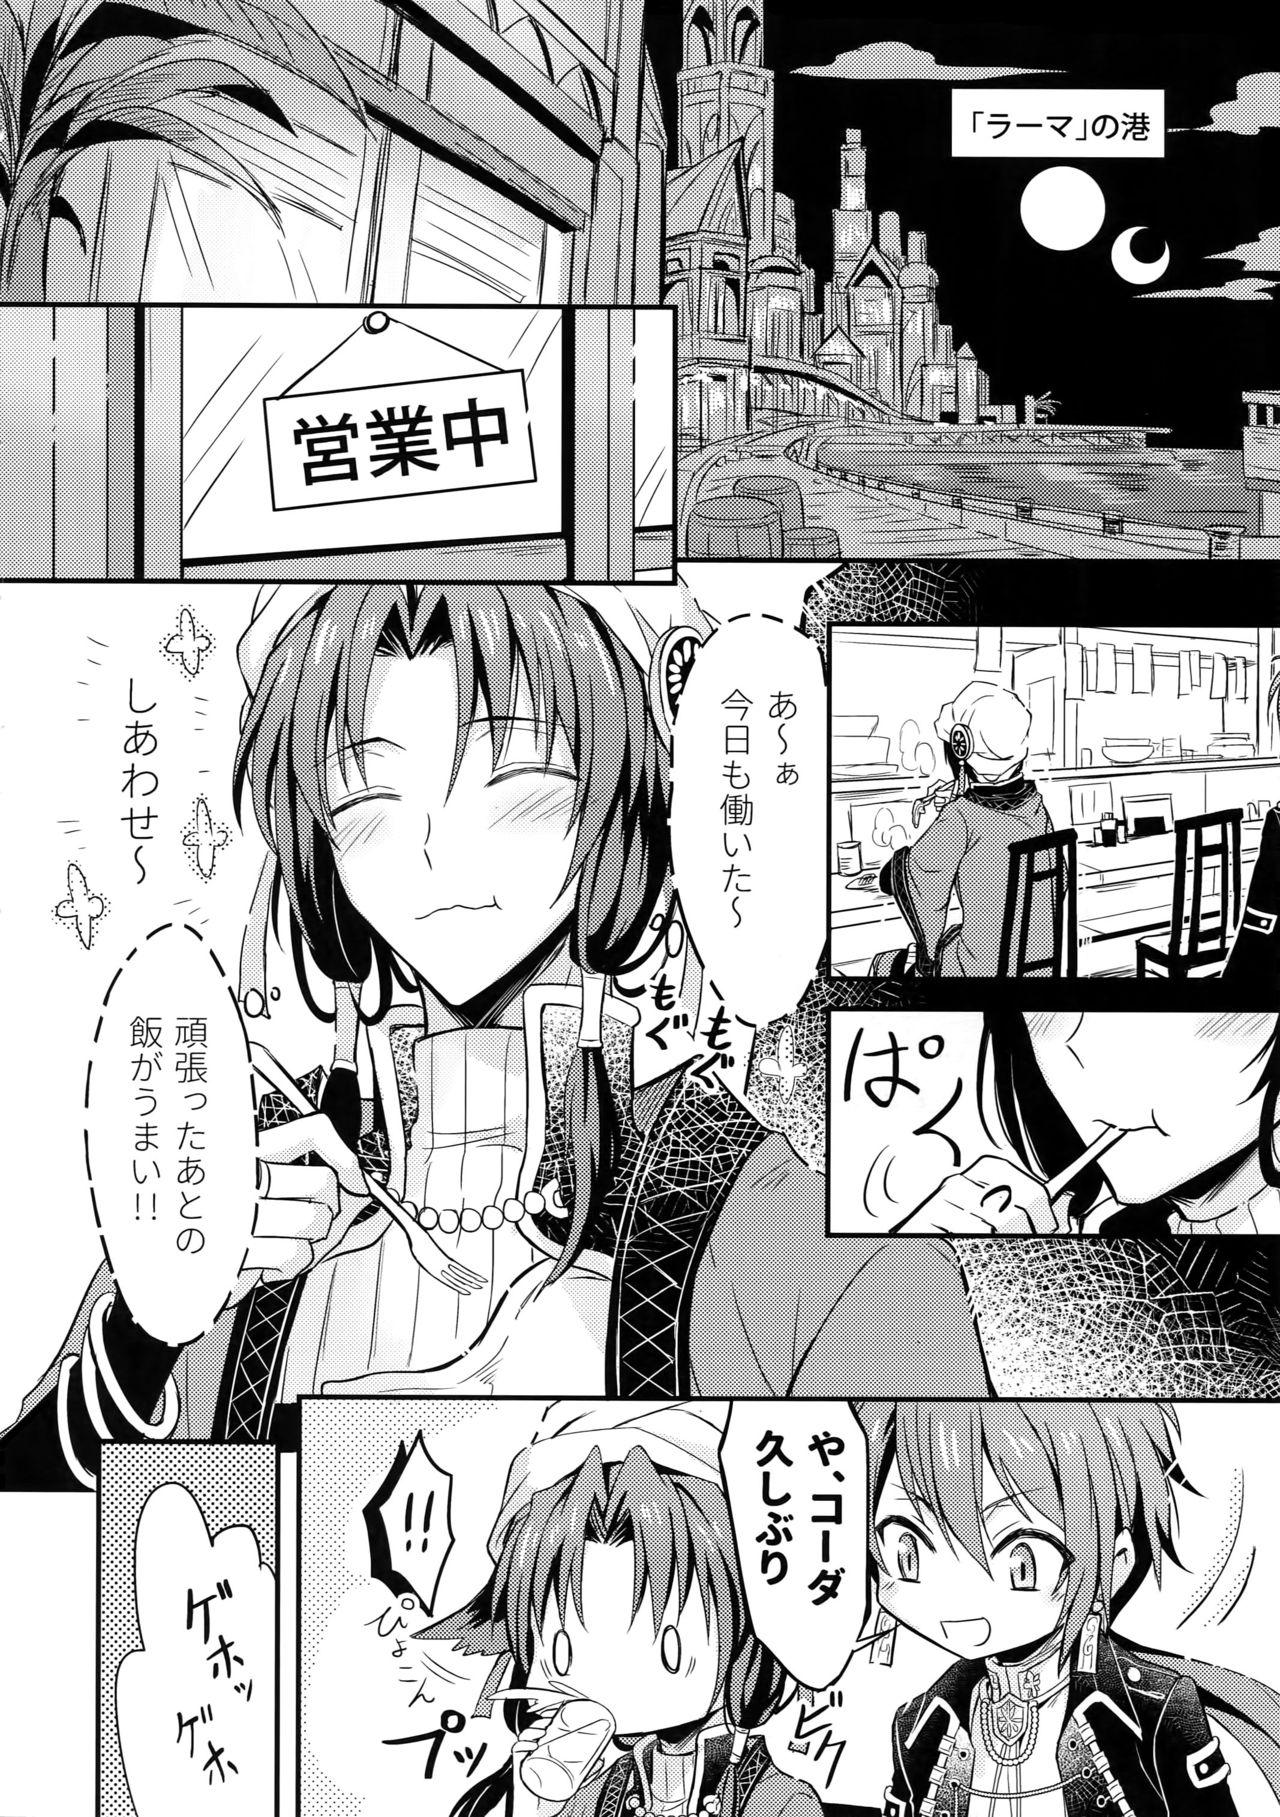 Delicia Top Secret - Idolish7 Teasing - Page 3